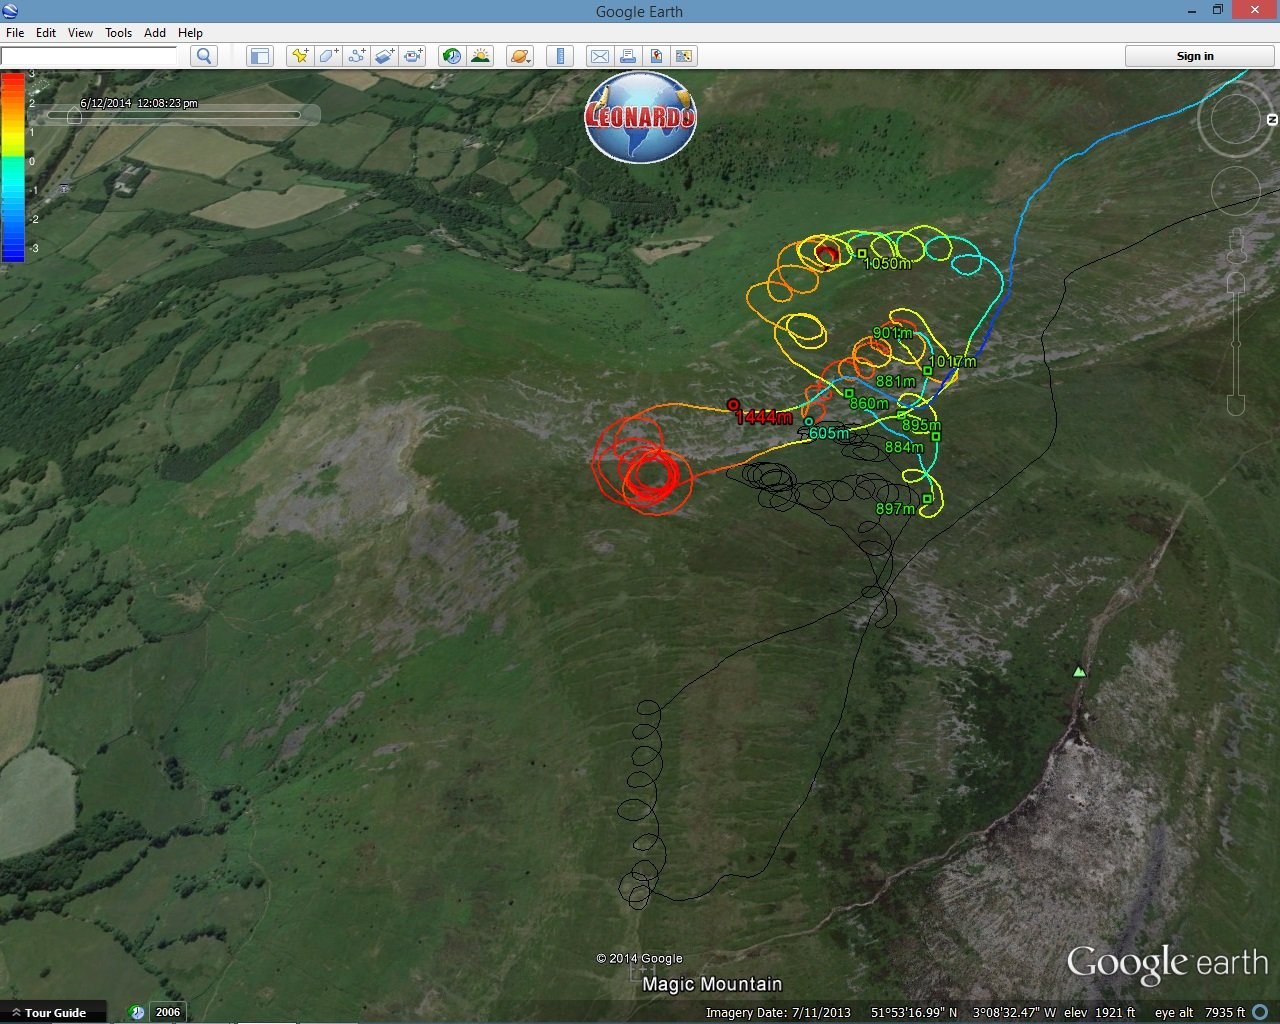 Google Earth paragliding tracklog in detail